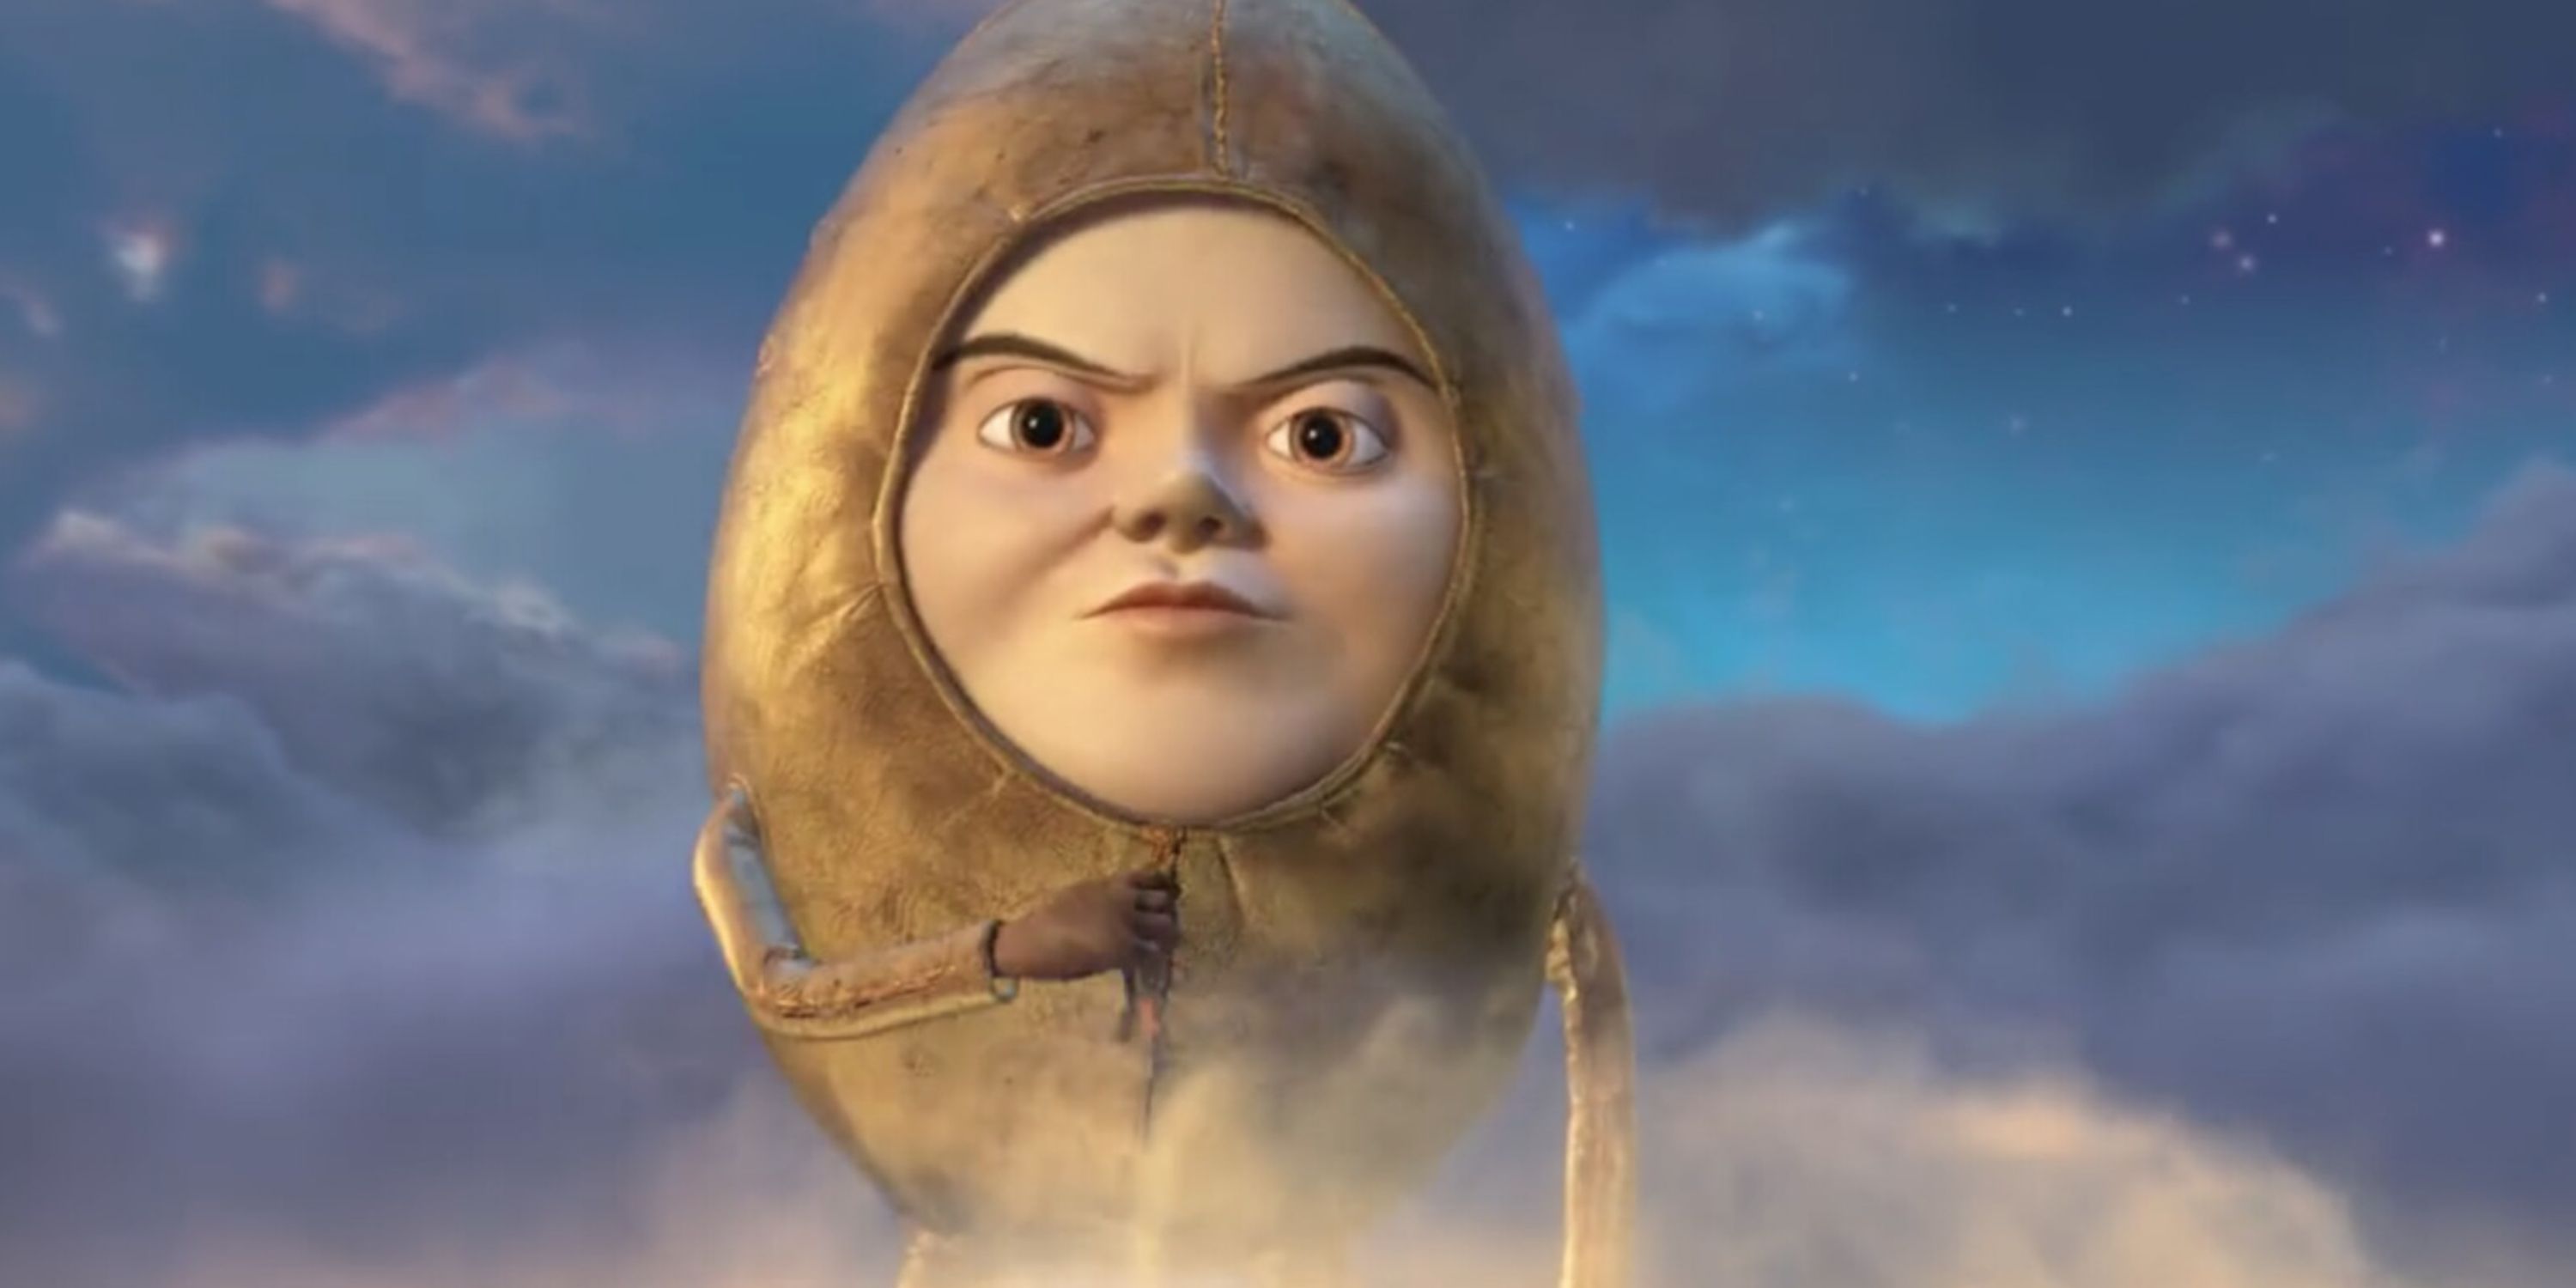 Humpty Alexander Dumpty dressed as the golden egg in Puss in Boots